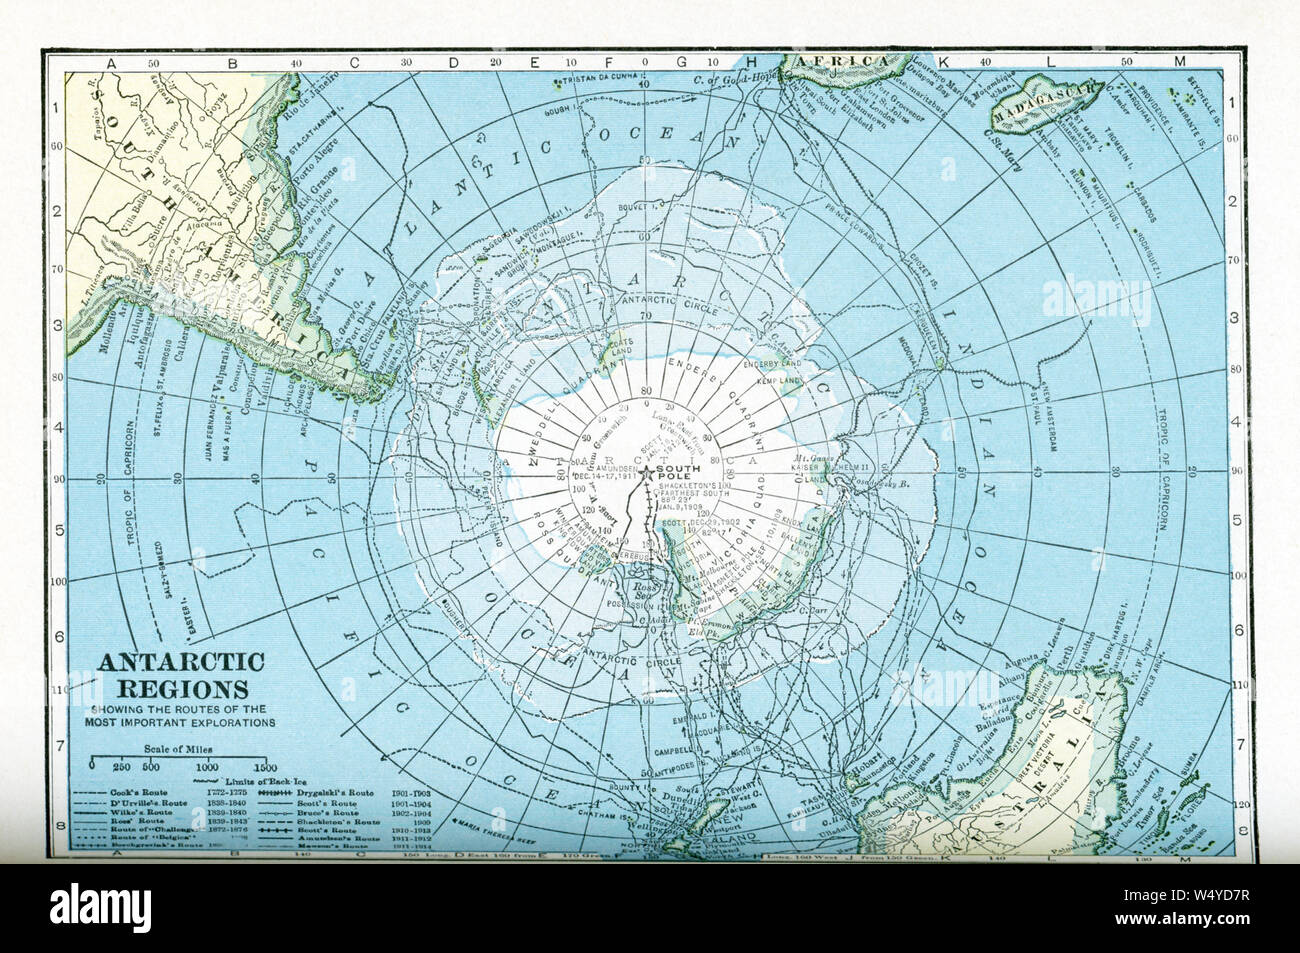 This map dates to the 1920s and shows the Antarctic regions, with the routes taken by various explorers between 1772 and 1914. The routes shown are those of Cook, D’Urville, Wilke, Ross, “Challenger,” “Belgica,” Borchgrevink, Drygalski, Scott, Bruce, Shackleton, Scott, Amundsen, and Mawson. Stock Photo